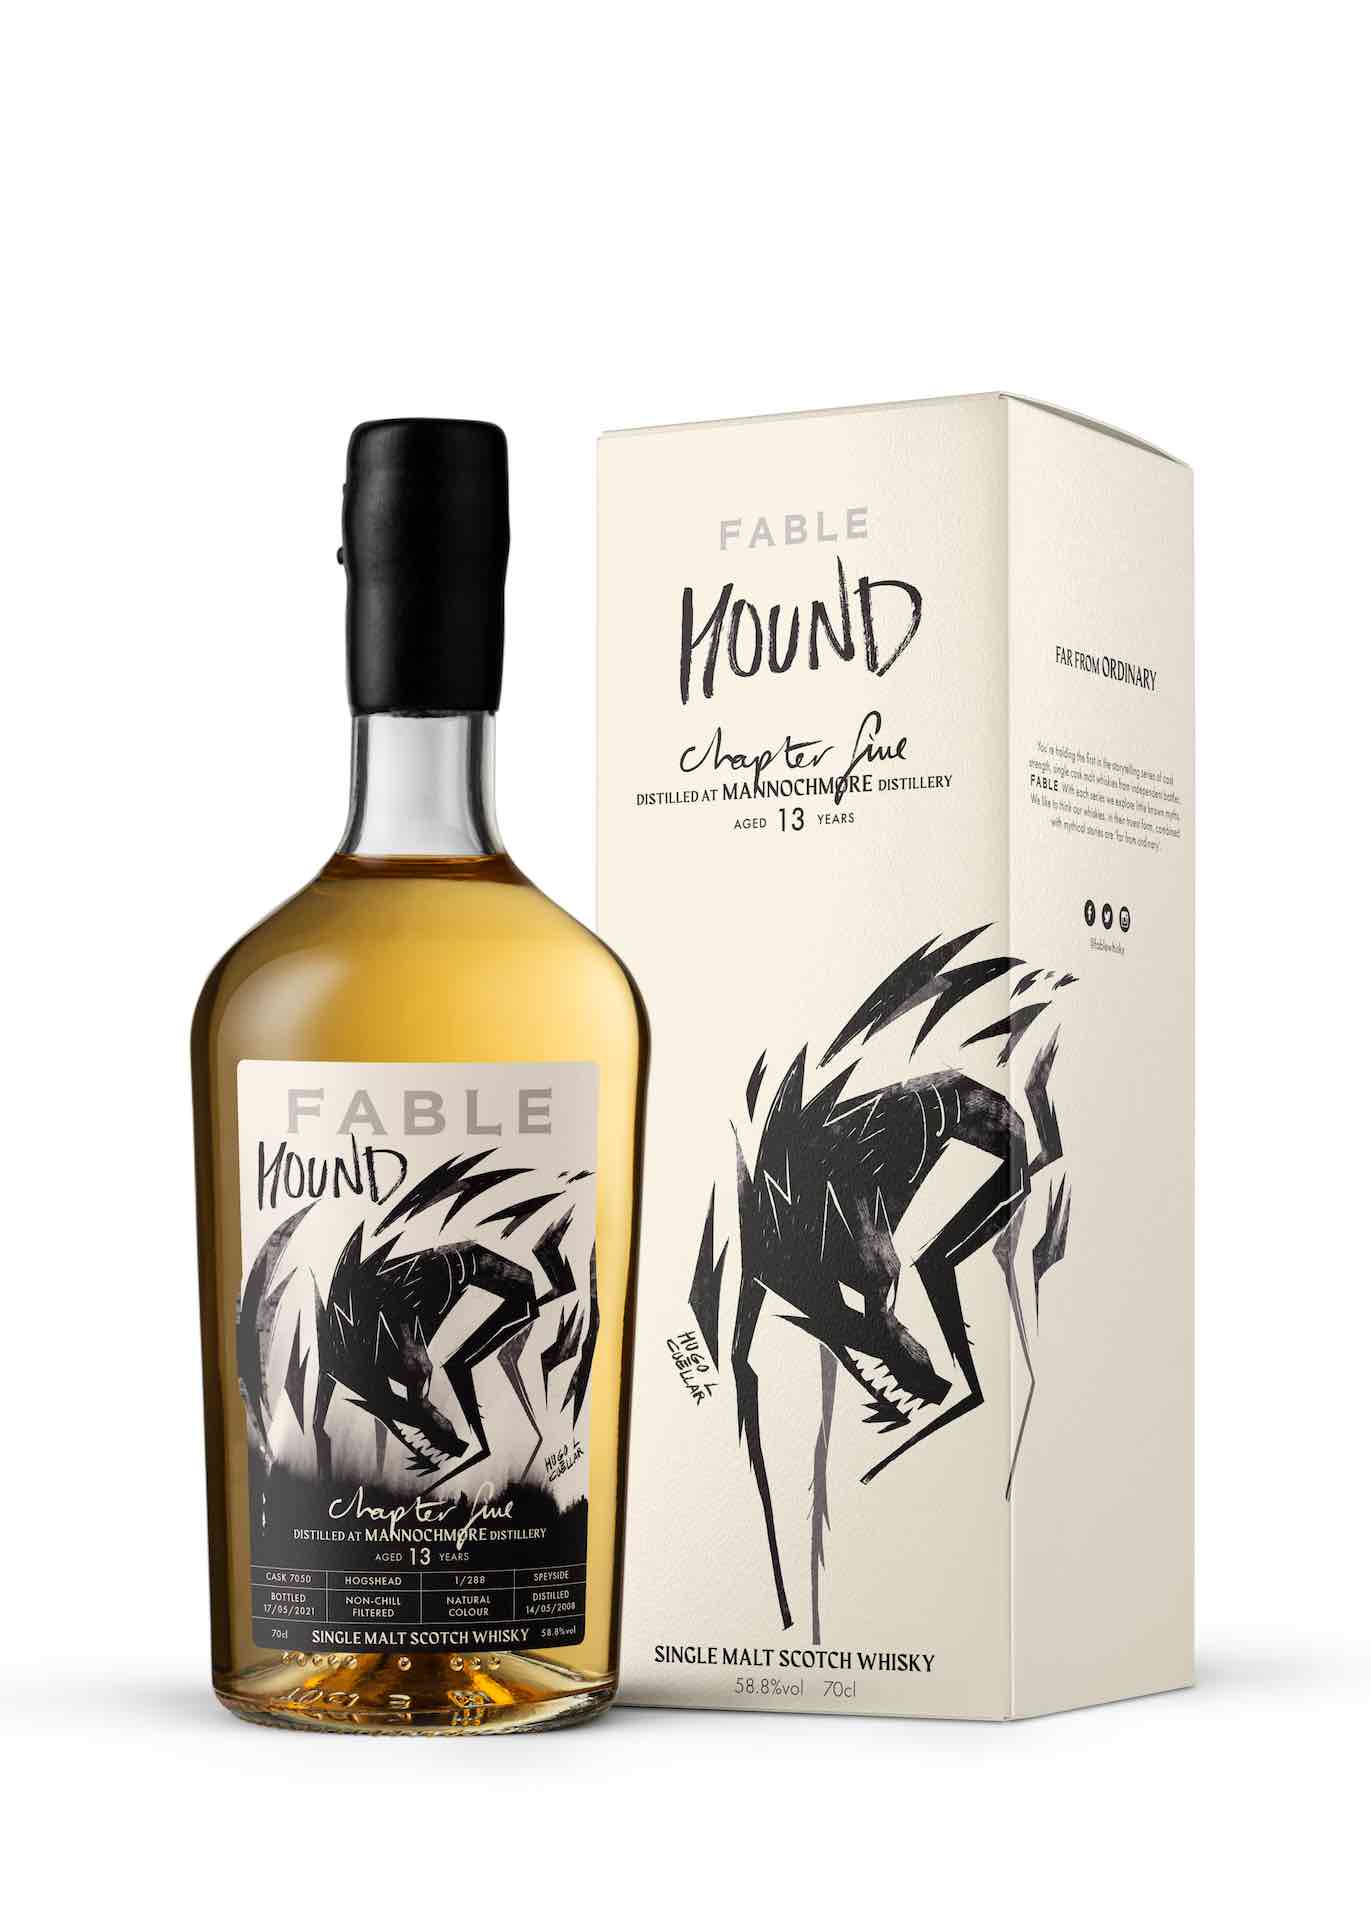 Fable Whisky Mannochmore Chapter Five Hound